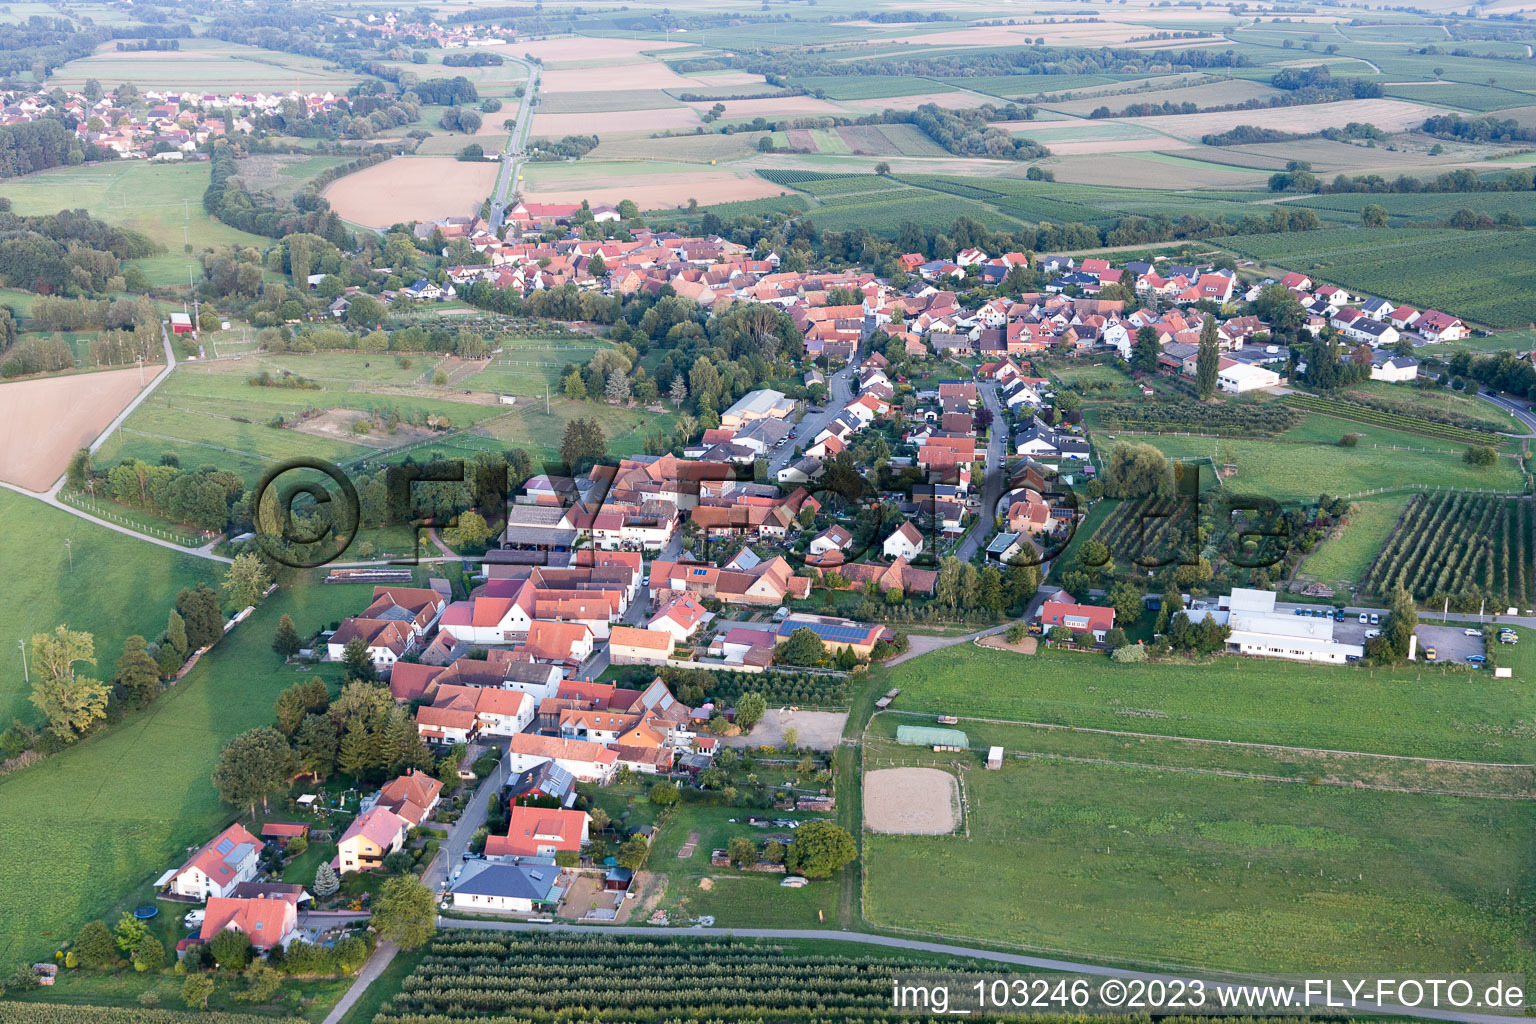 Oberhausen in the state Rhineland-Palatinate, Germany from above